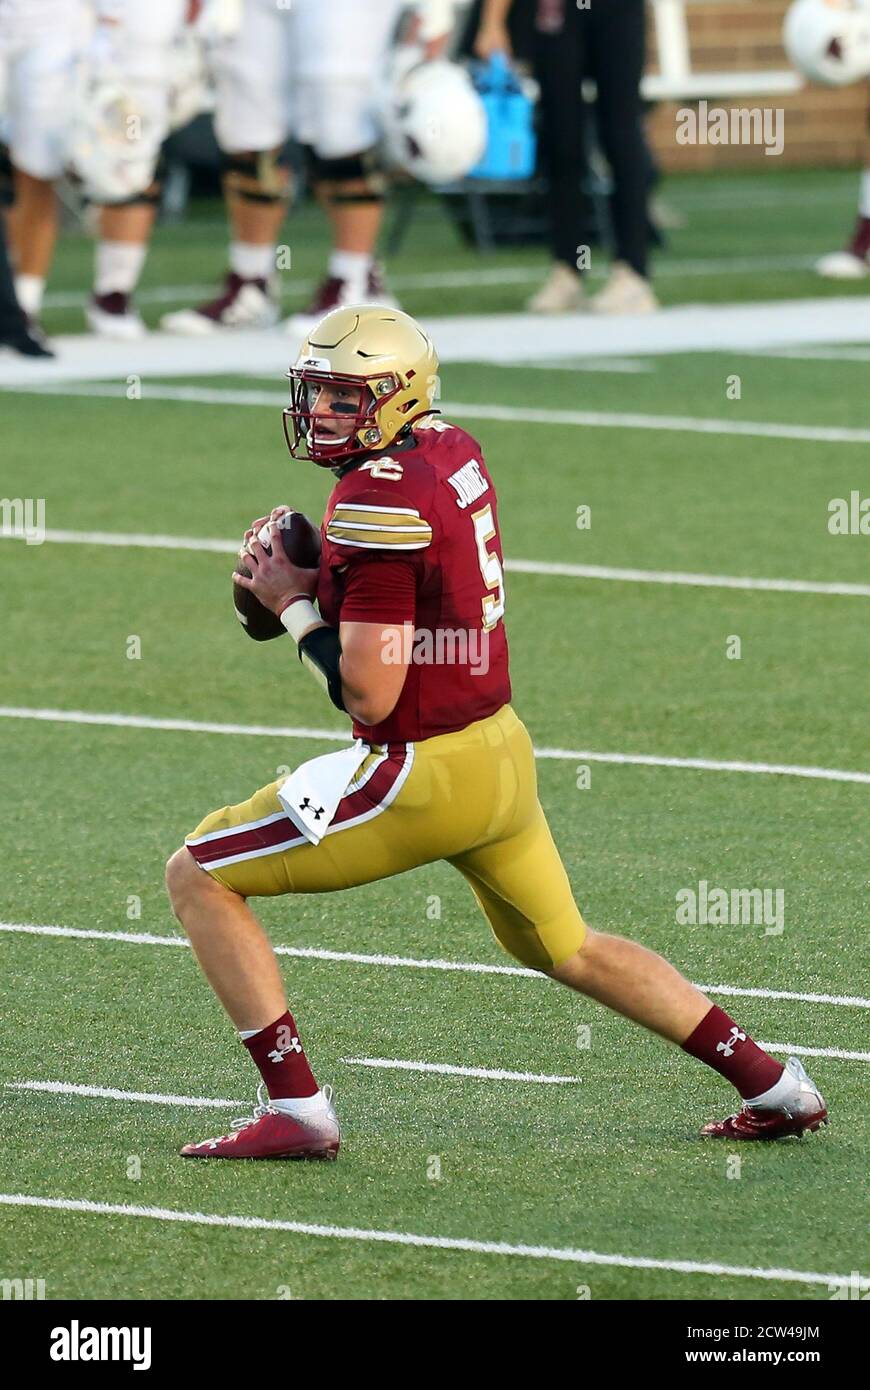 Alumni Stadium. 26th Sep, 2020. MA, USA; Boston College Eagles quarterback Phil Jurkovec (5) in action during the NCAA football game between Texas State Bobcats and Boston College Eagles at Alumni Stadium. Anthony Nesmith/CSM/Alamy Live News Stock Photo